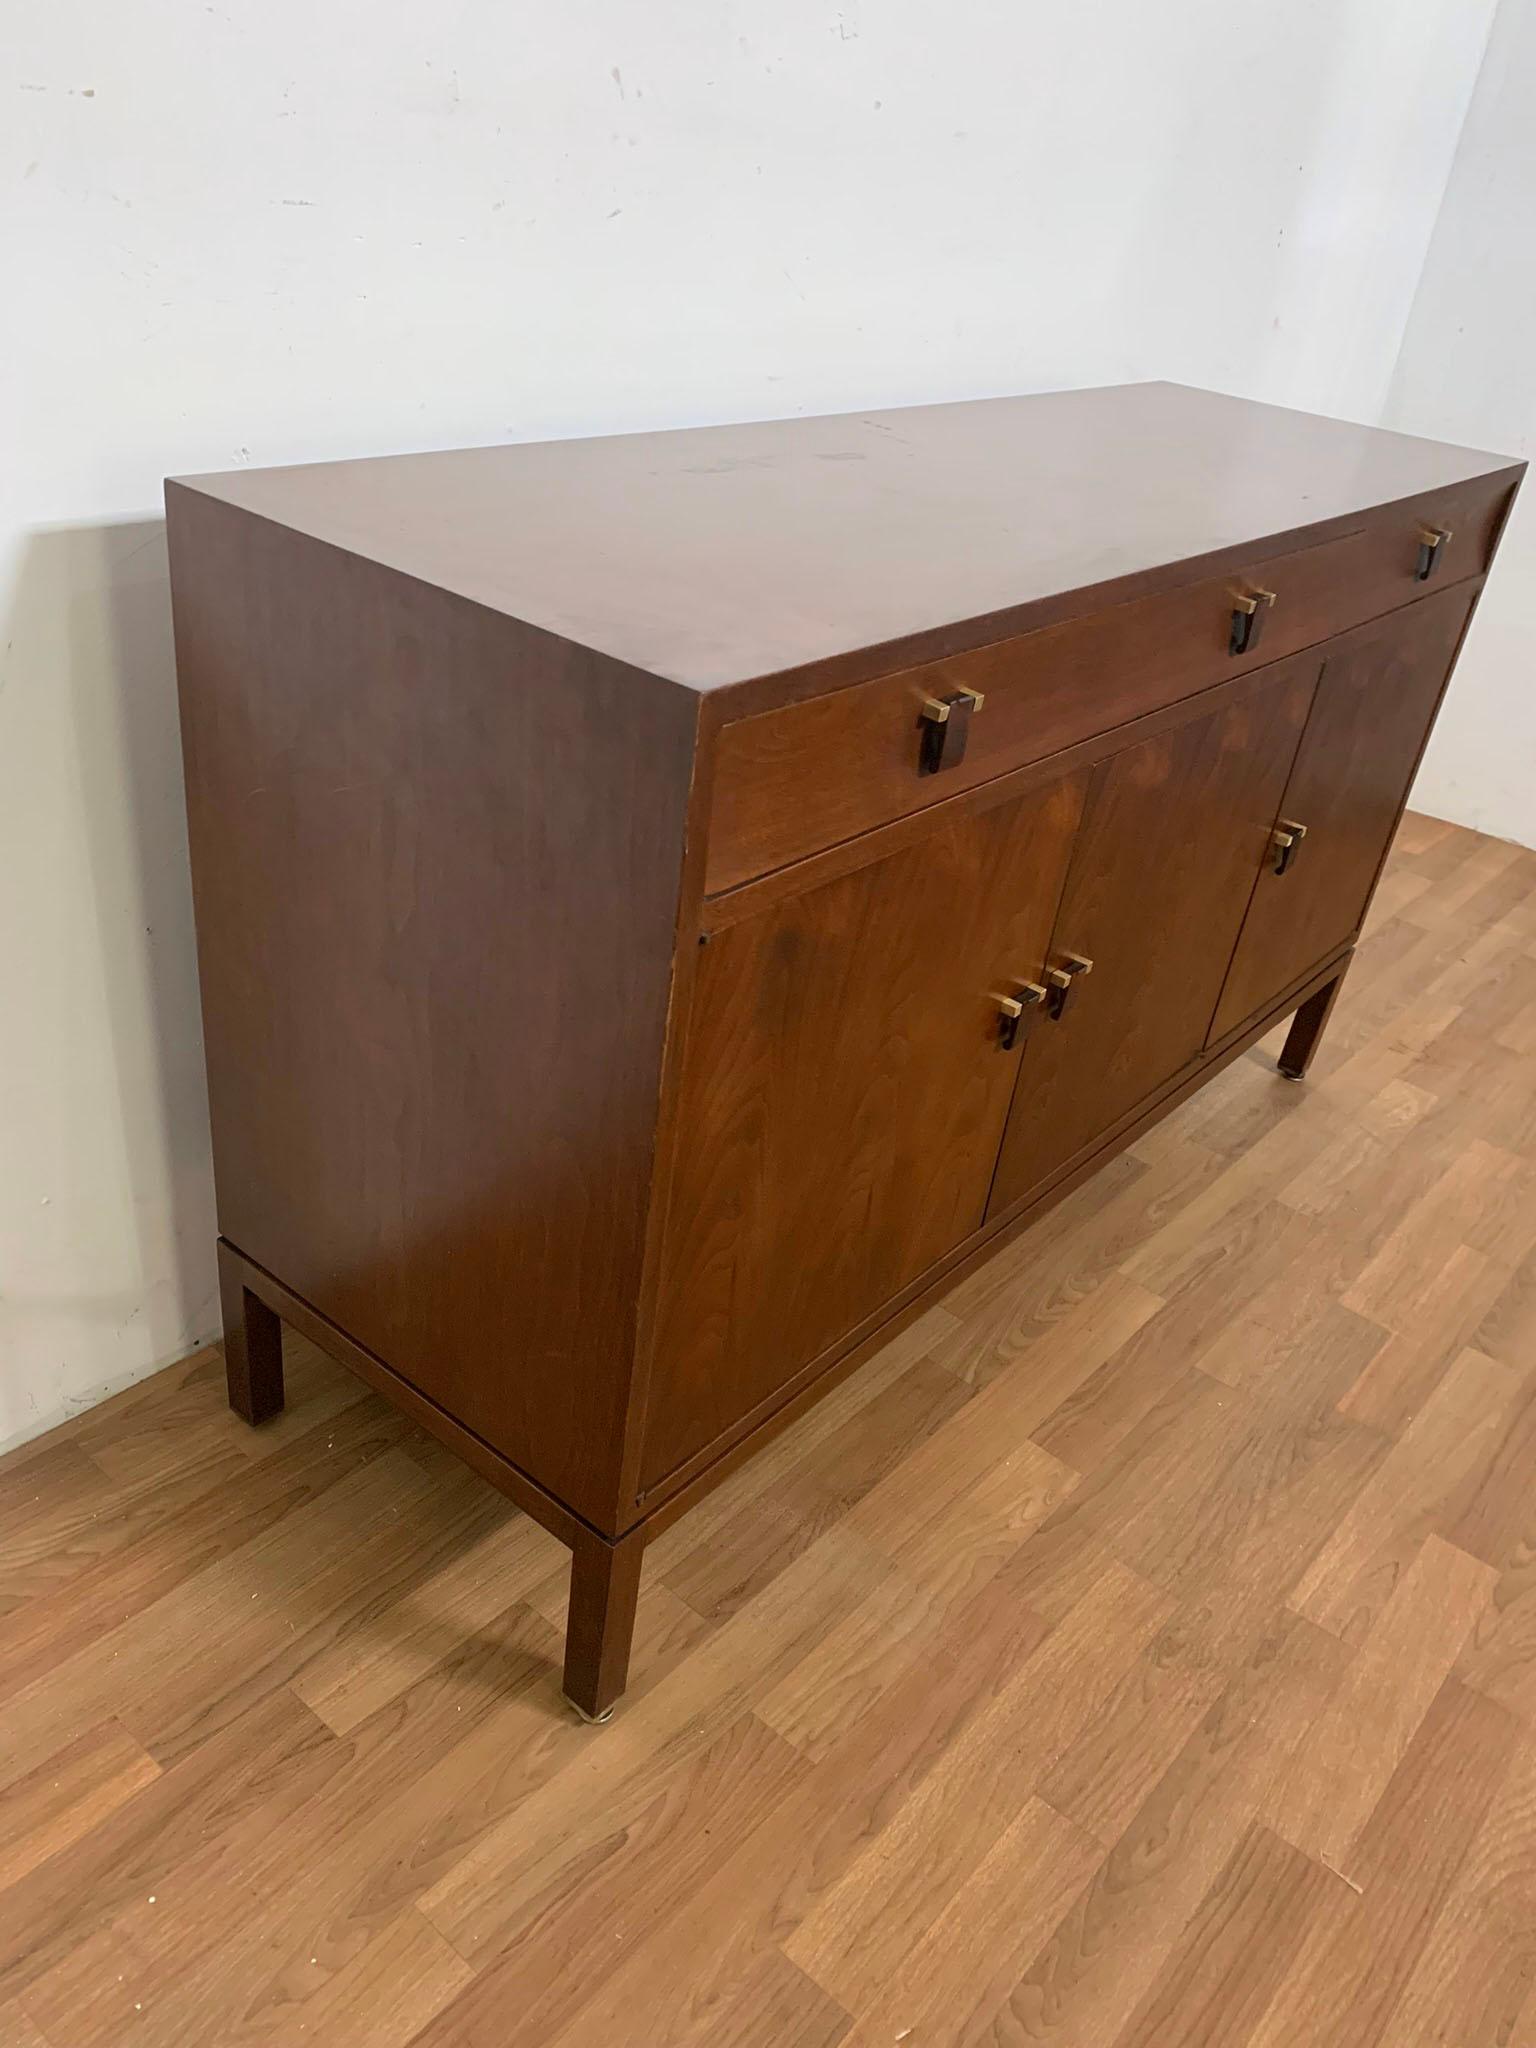 Edward Wormley for Dunbar Mahogany Credenza with Rosewood Pulls, circa 1950s For Sale 5